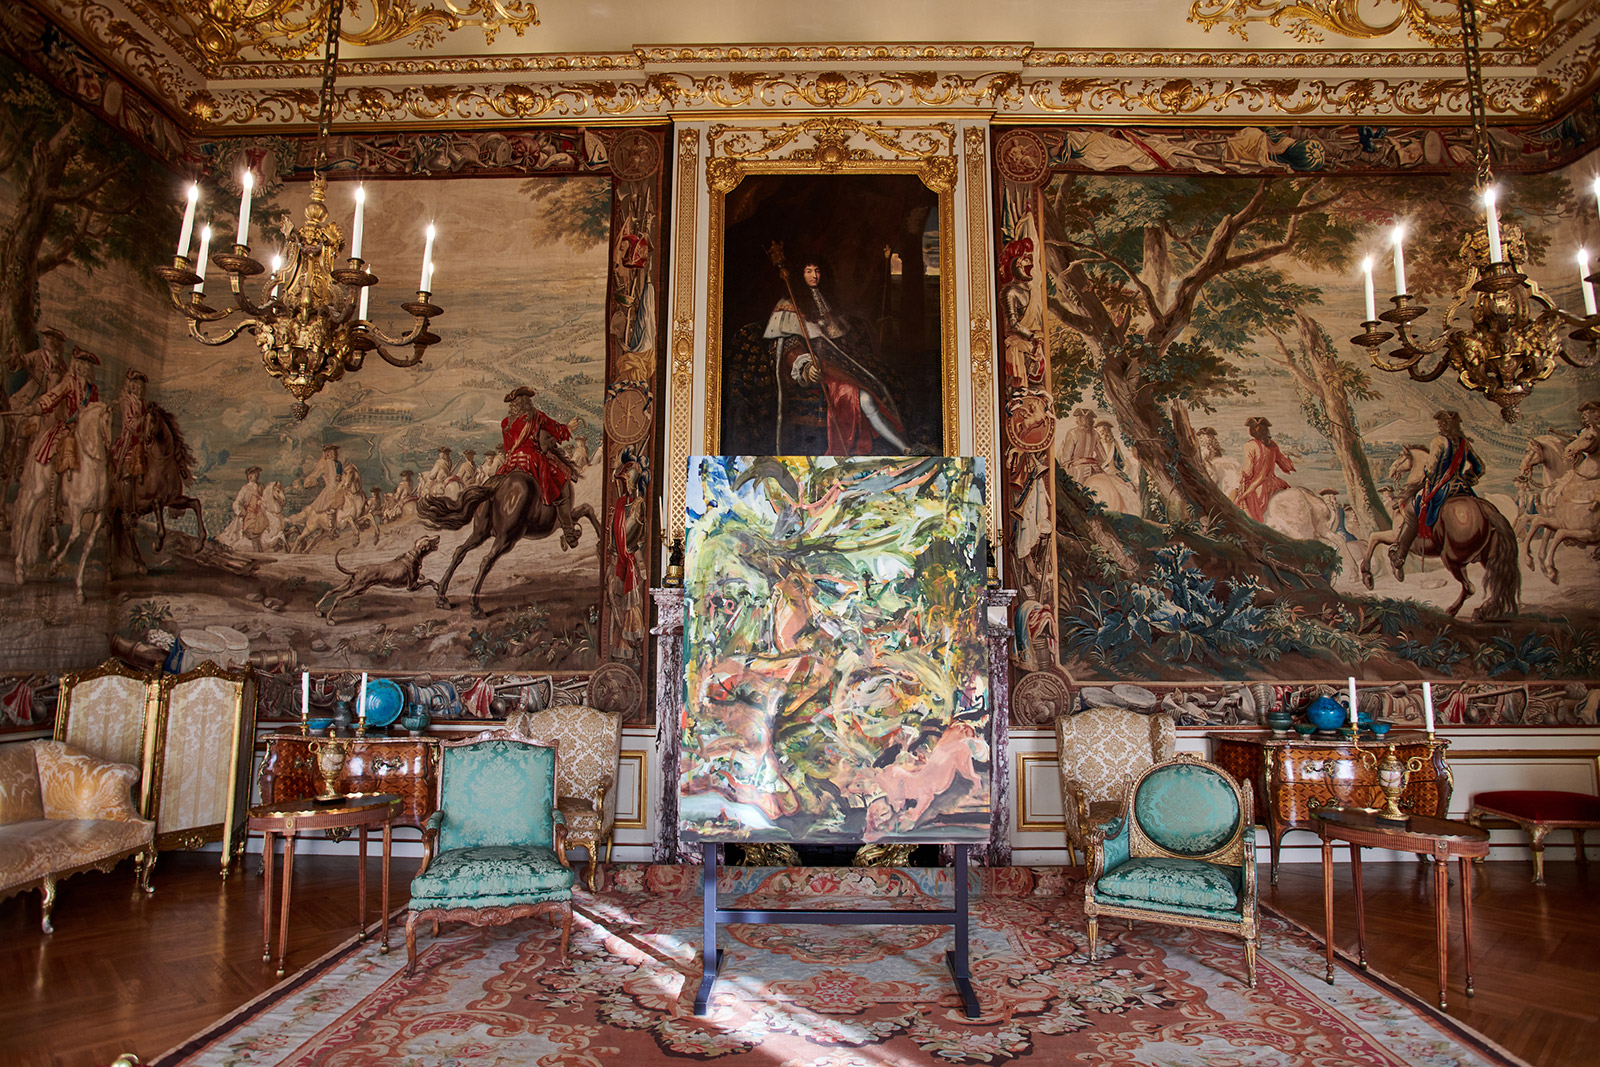 Cecily Brown’s feverish new works respond to Blenheim Palace and its collection